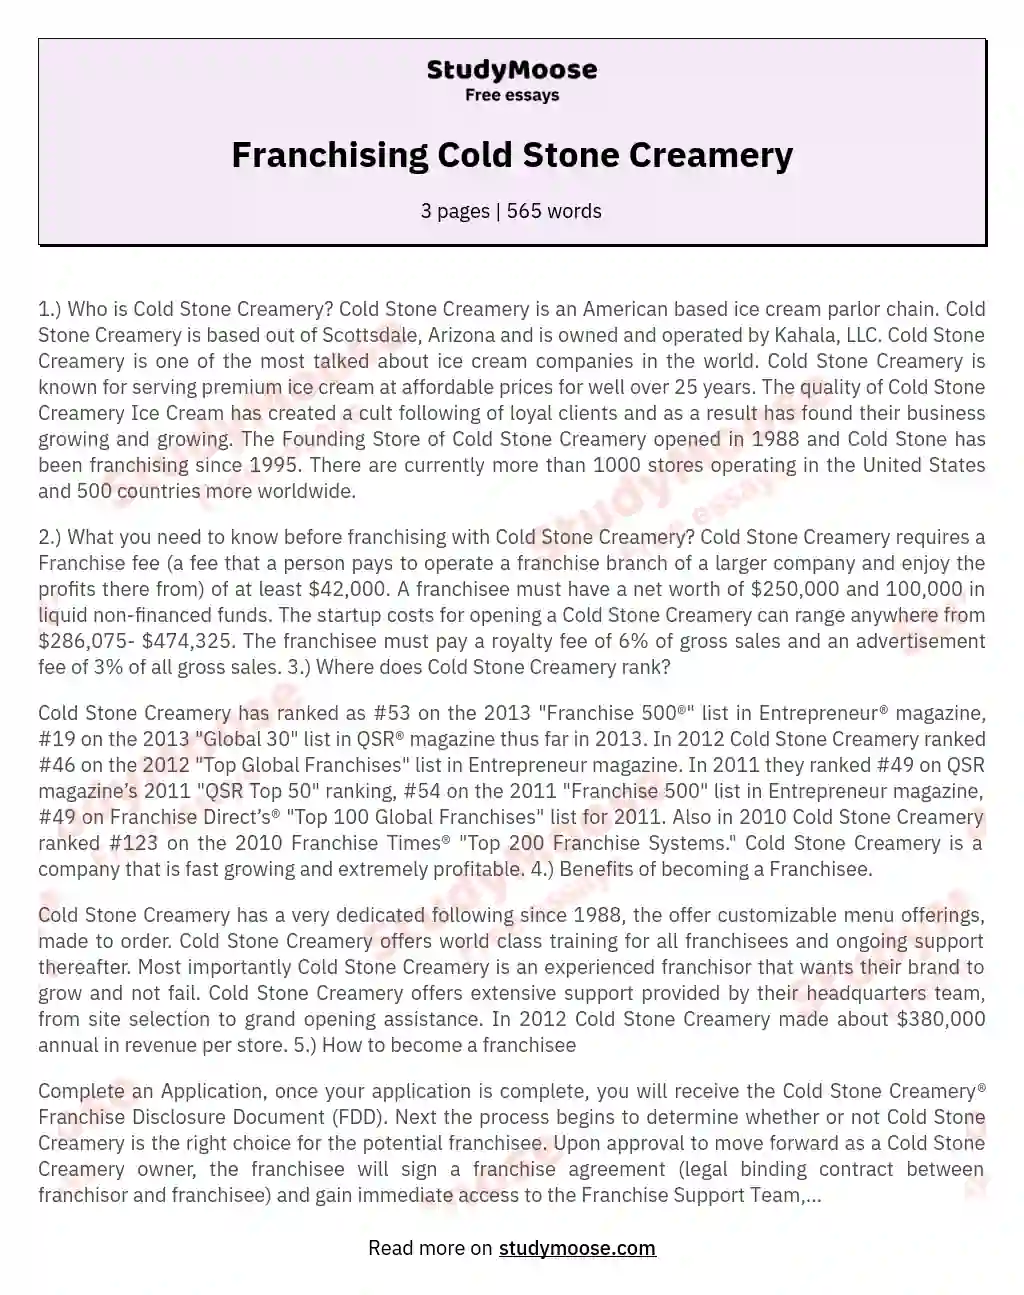 Franchising Cold Stone Creamery